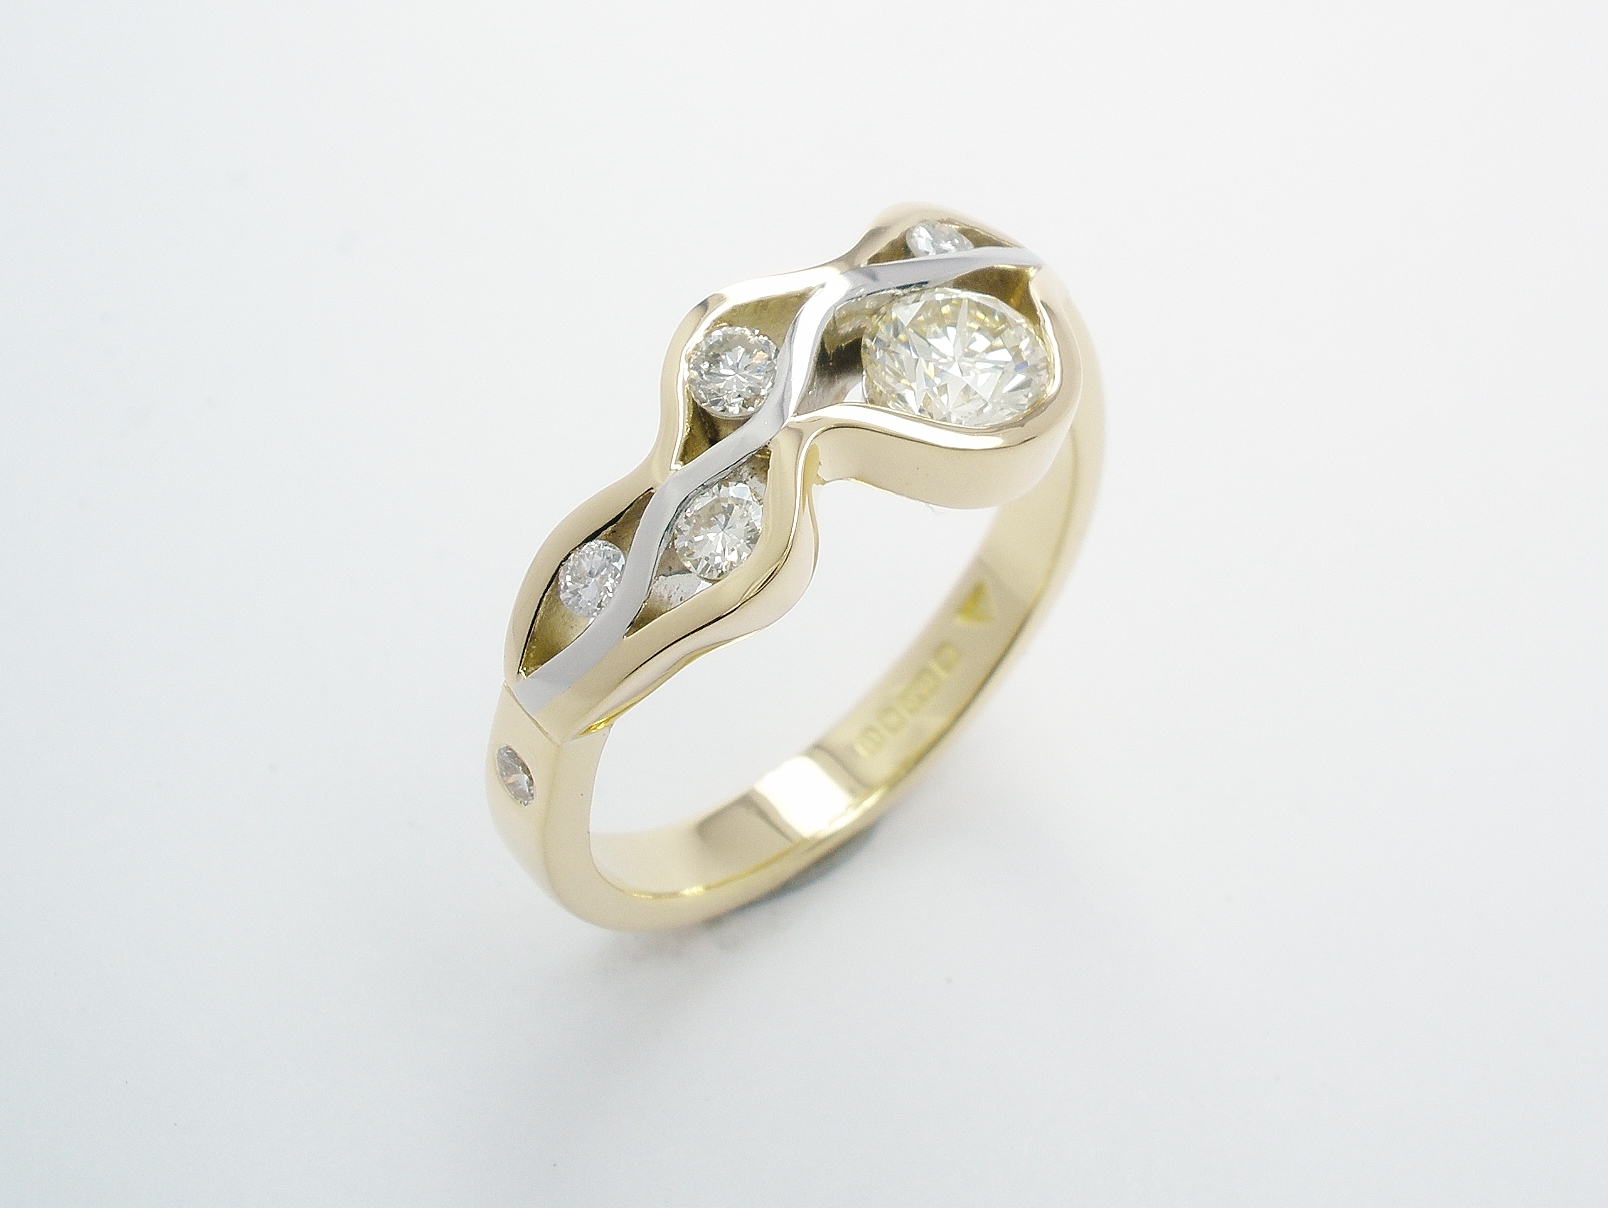 A 6 stone round brilliant cut diamond 'wave' style ring mounted in 18ct. yellow gold and platinum.